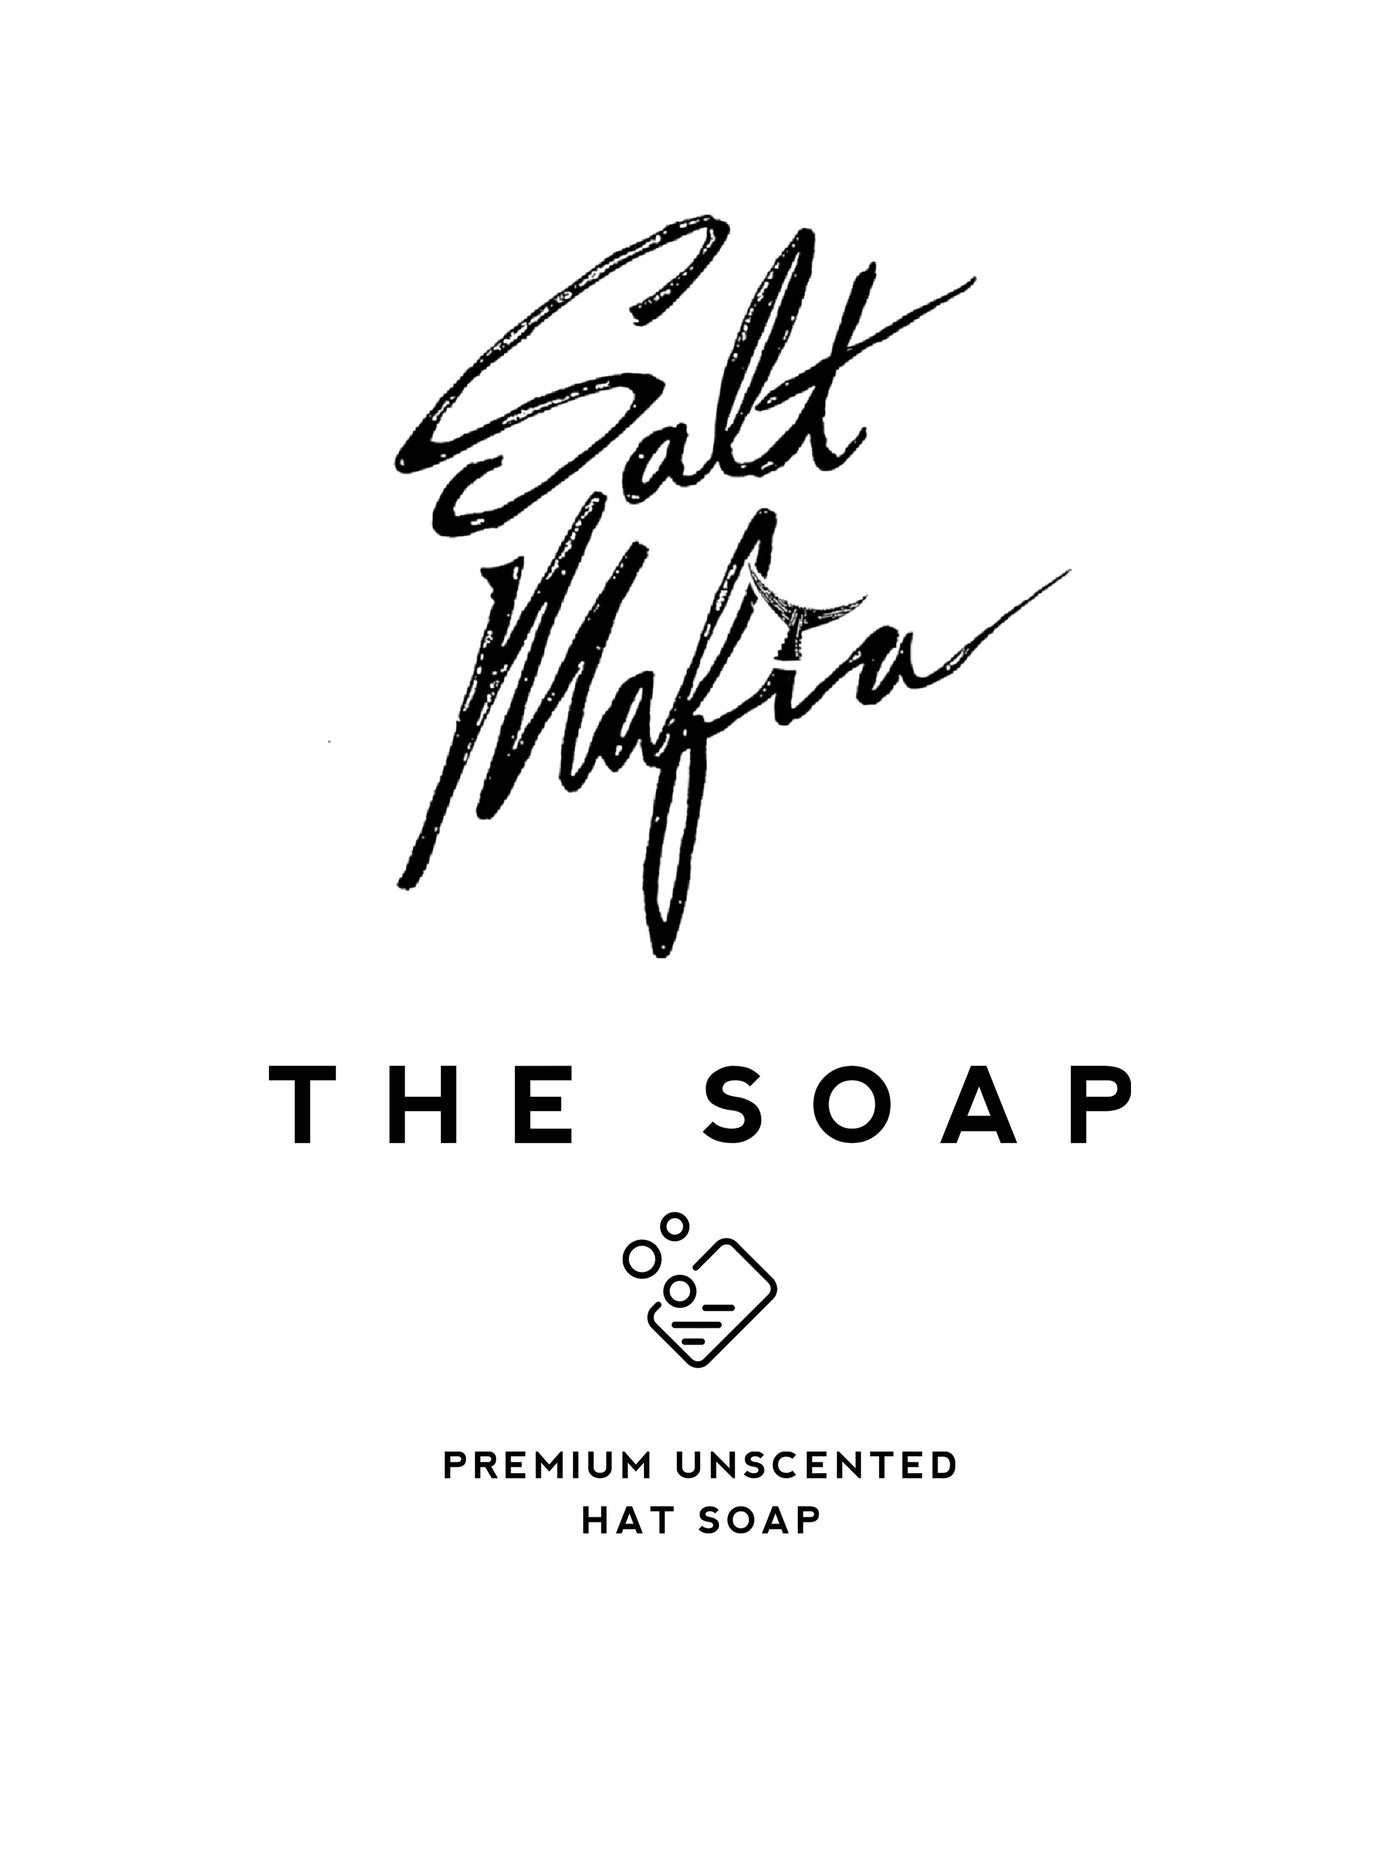 THE HAT SOAP